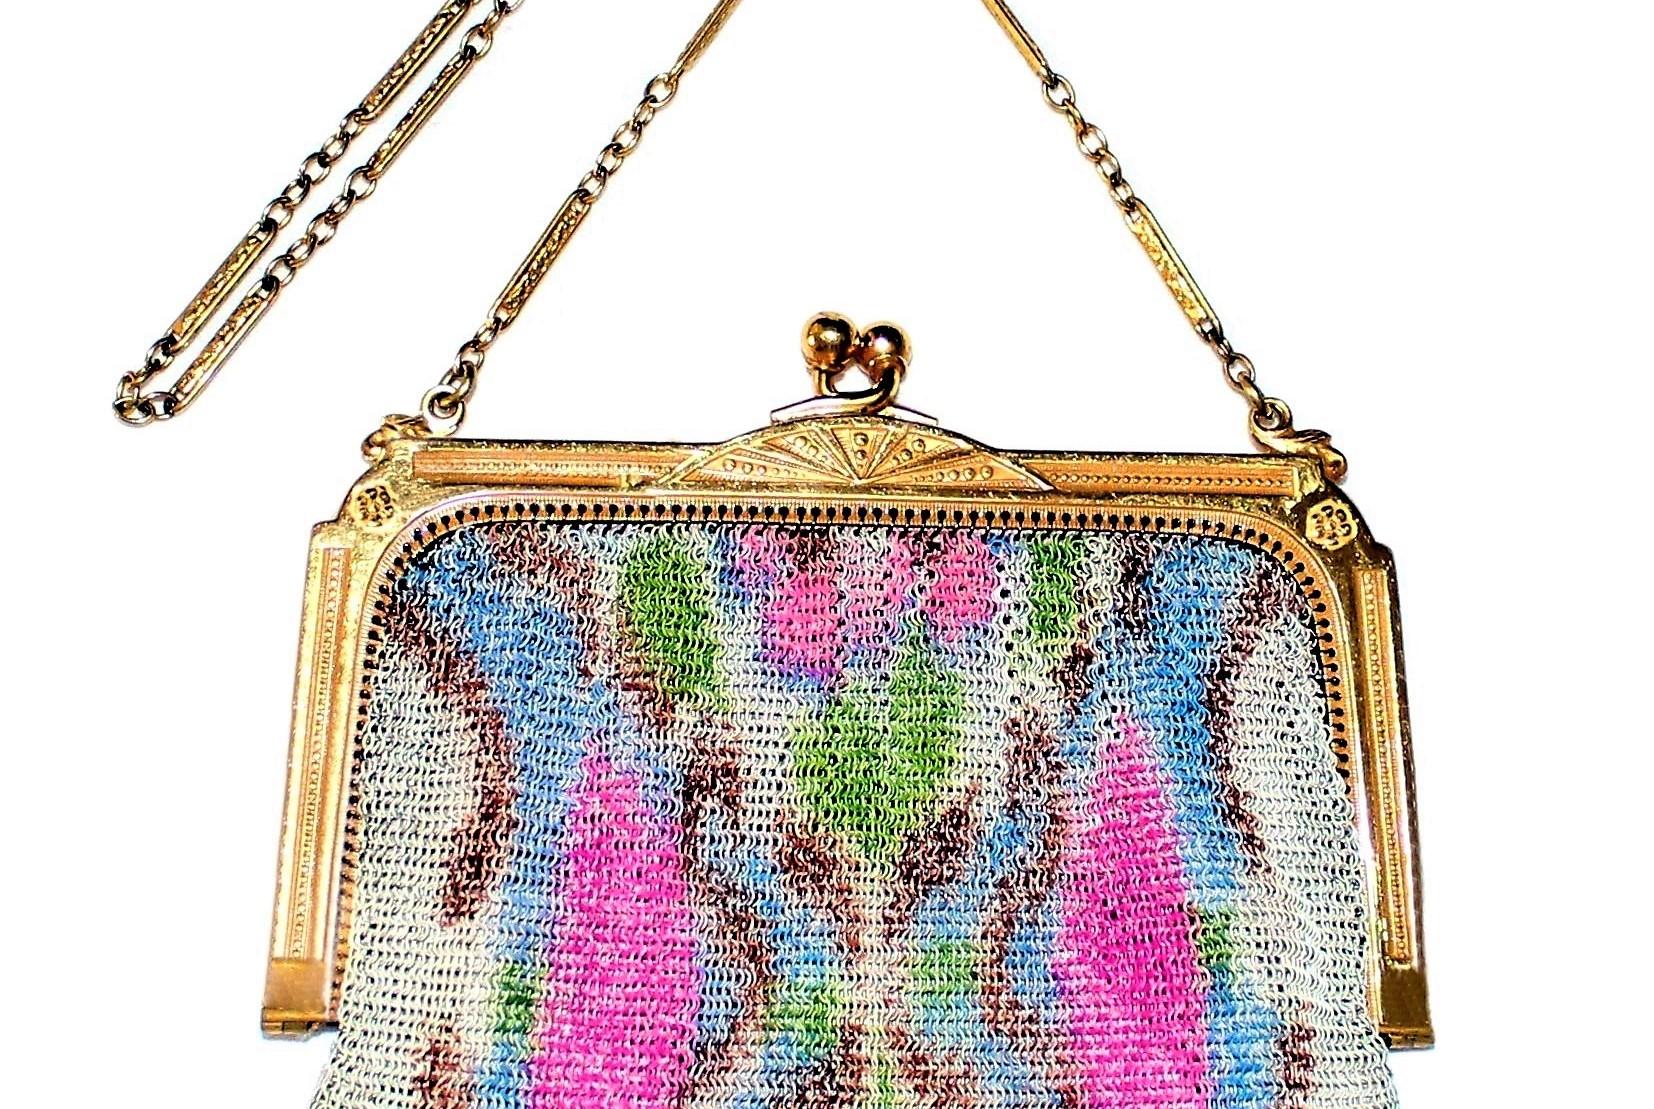 Circa 1920s to 1930s Whiting & Davis delicate gold tone metal mesh purse embellished with a bright floral motif, hanging from a bright gold tone metal frame.  Inside is a pale-peach satin lining that has a gathered side pocket with a small, round